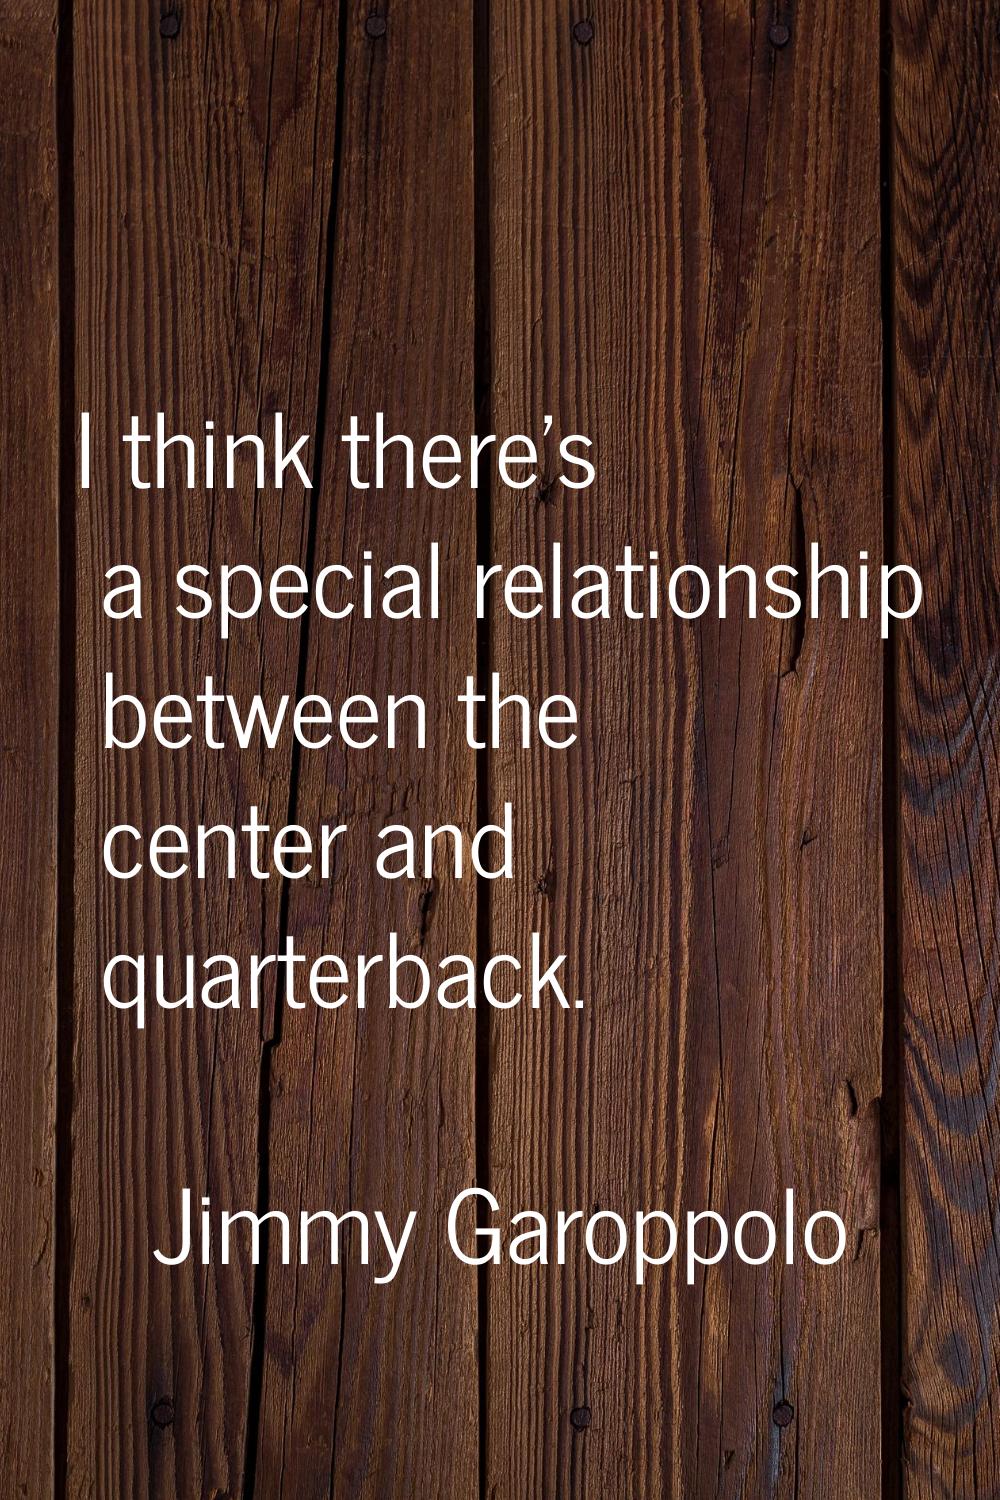 I think there's a special relationship between the center and quarterback.